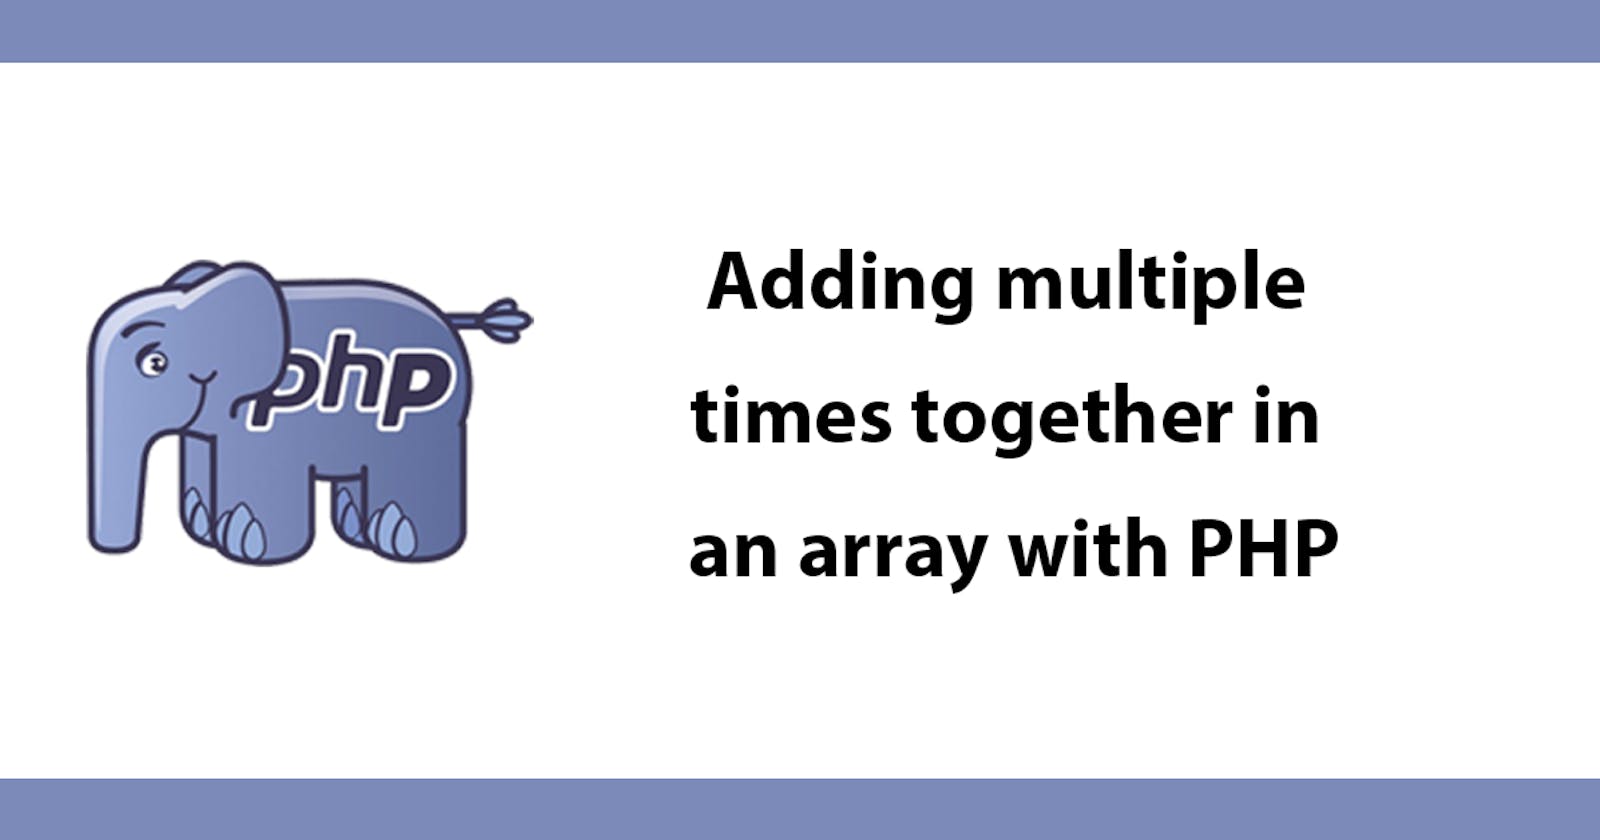 Adding multiple times together in an array with PHP